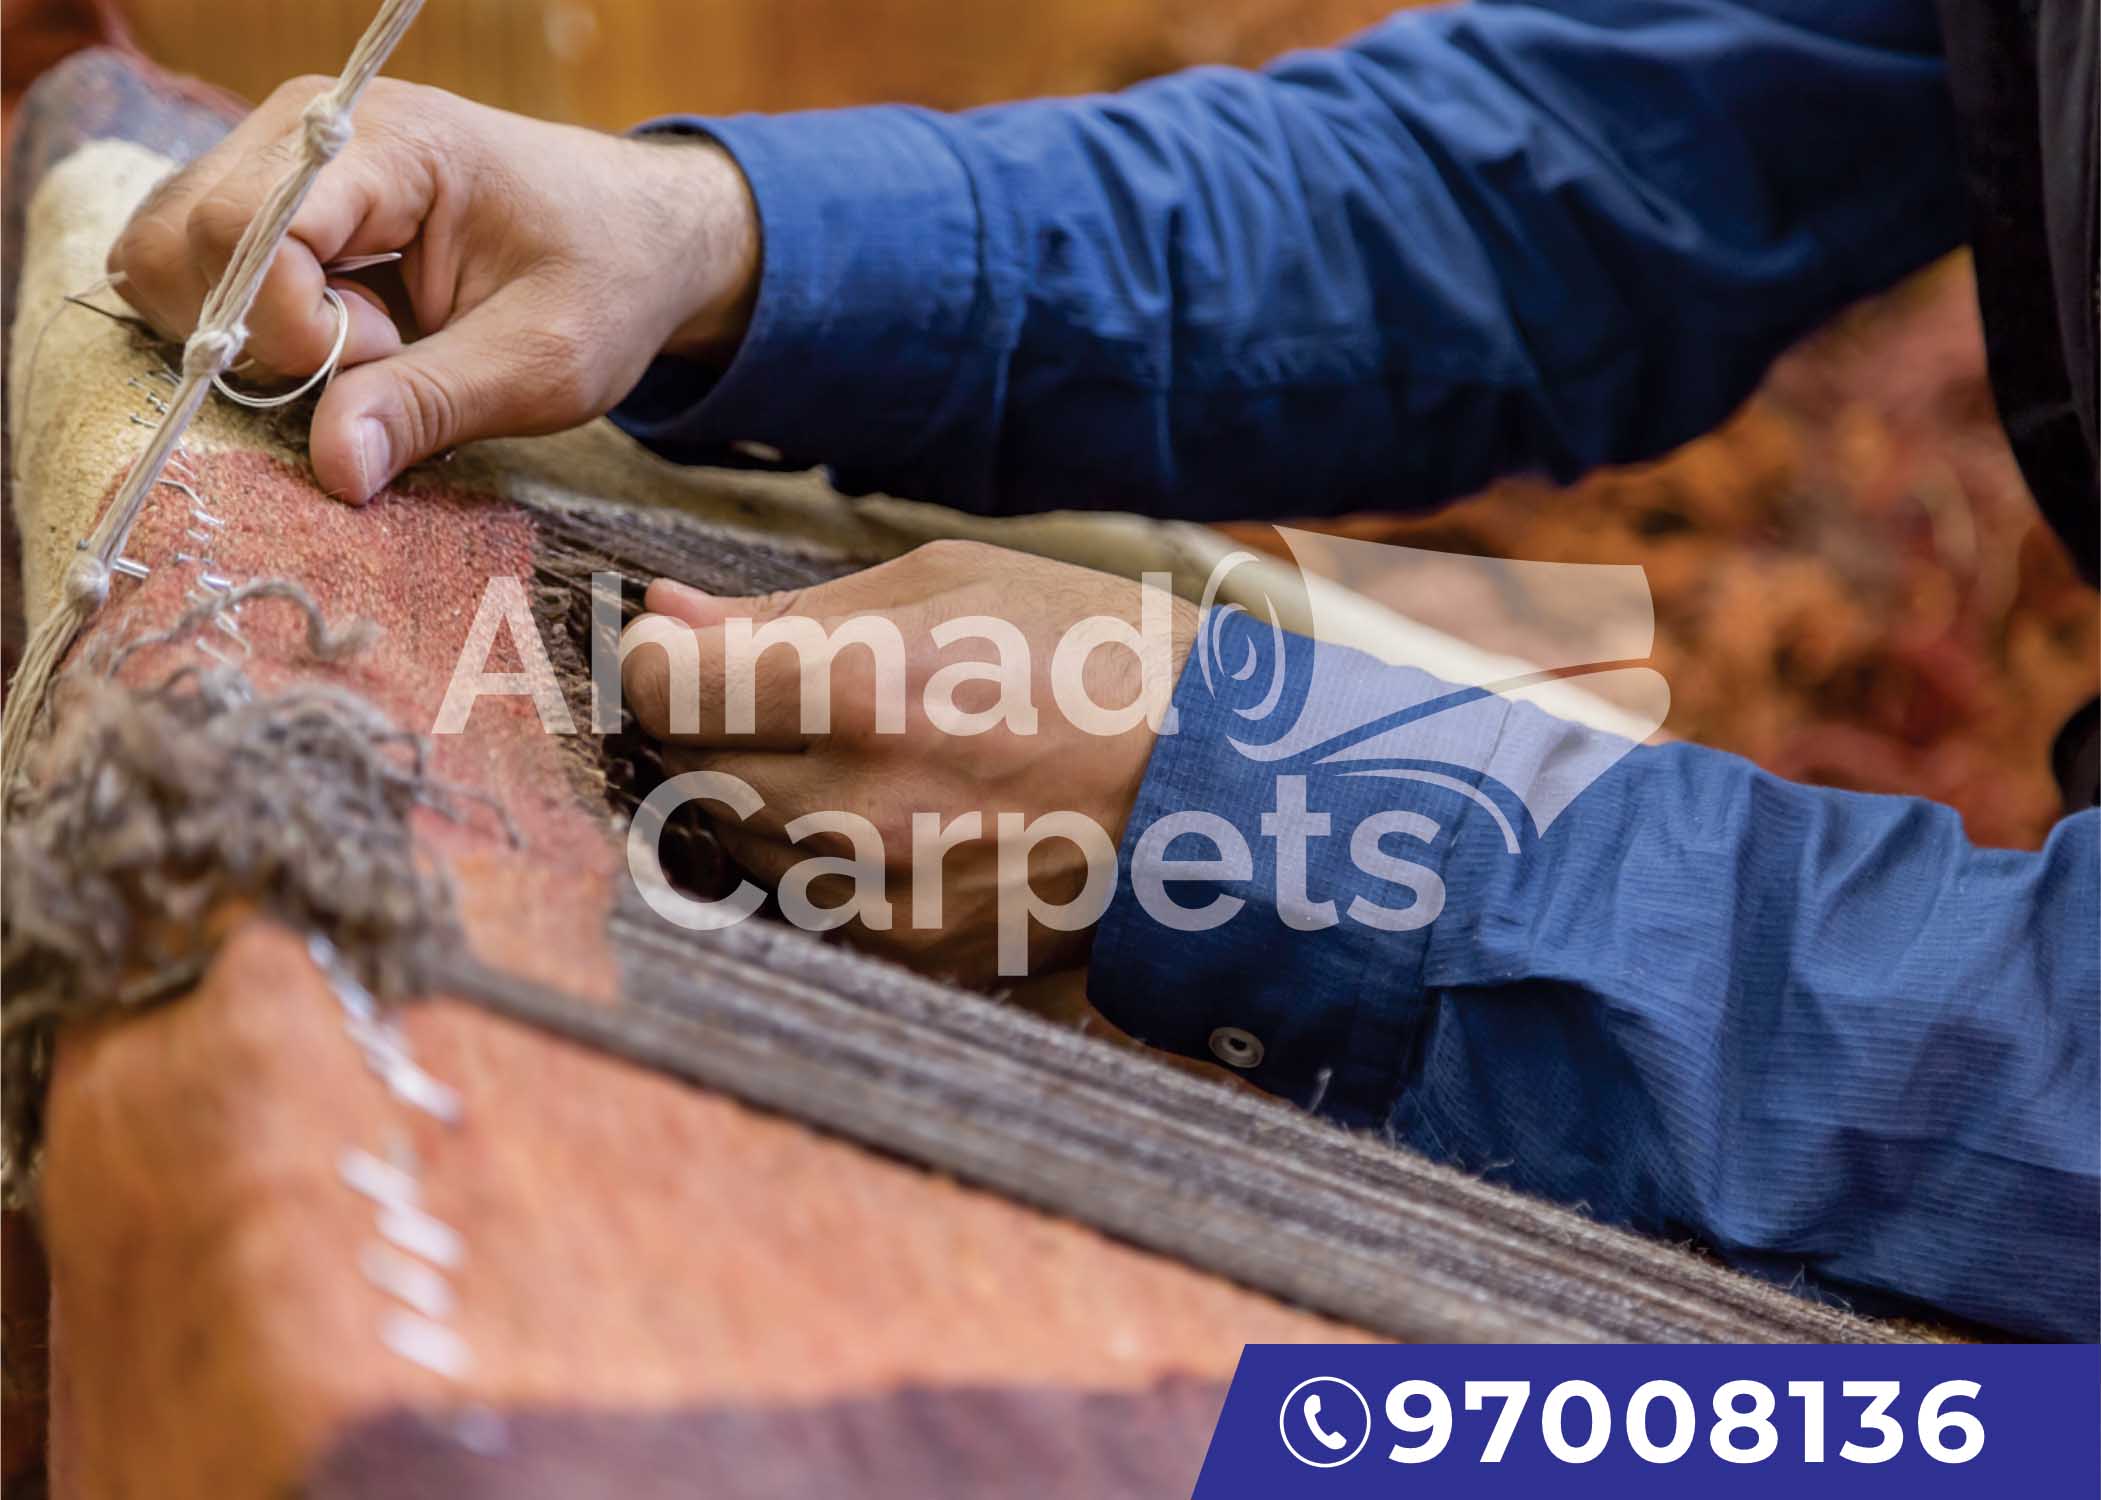 Ahmad carpet cleaning shop Hong Kong - Best professional services